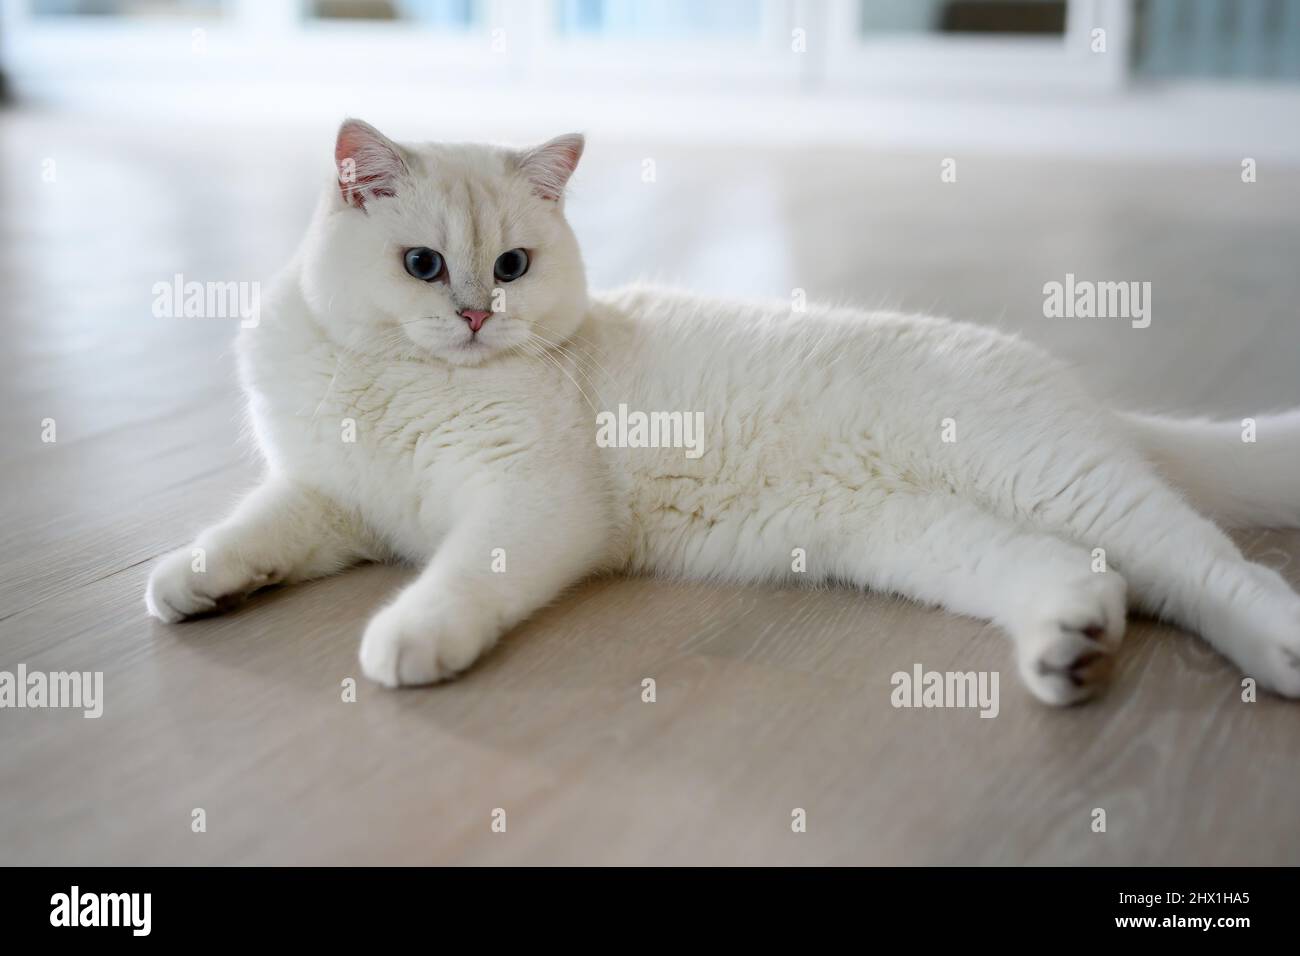 Handsome young cat posing sitting and look straight back, silver British Shorthair cat with big beautiful blue eyes, Contest grade white pedigree cat. Stock Photo